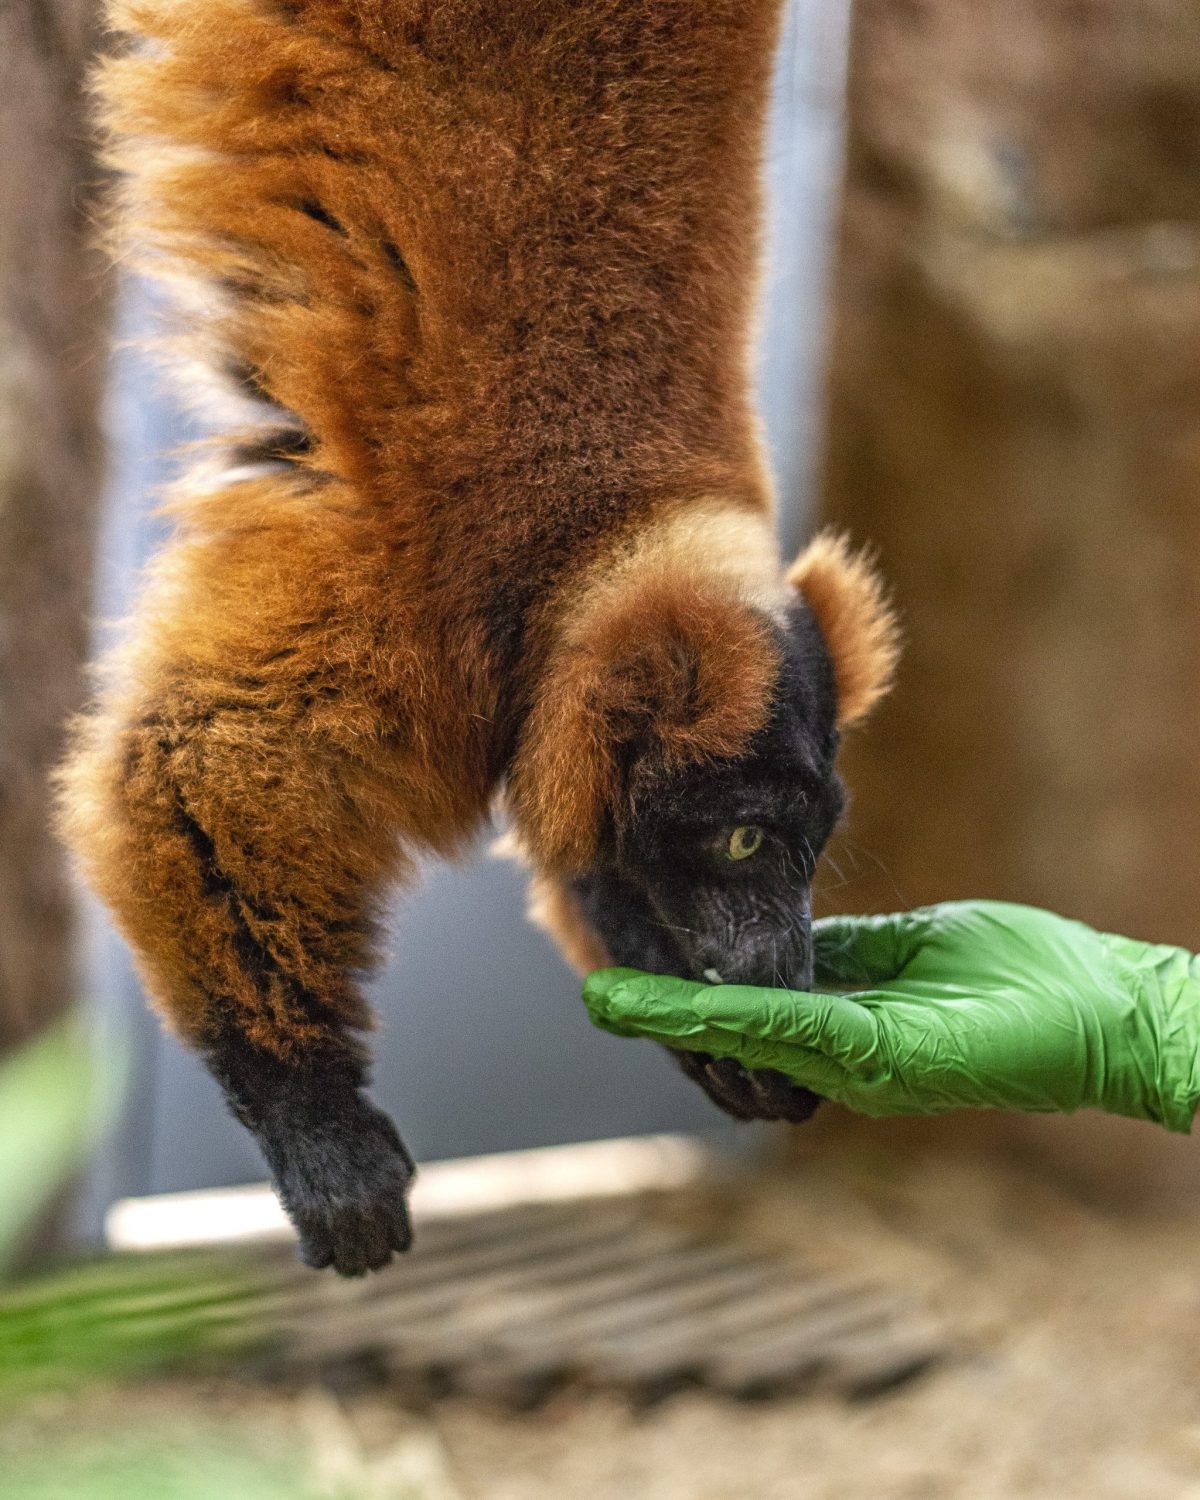 Red-ruffed Lemur Josephine eats a treat during an enrichment activity showcasing her hanging ability.